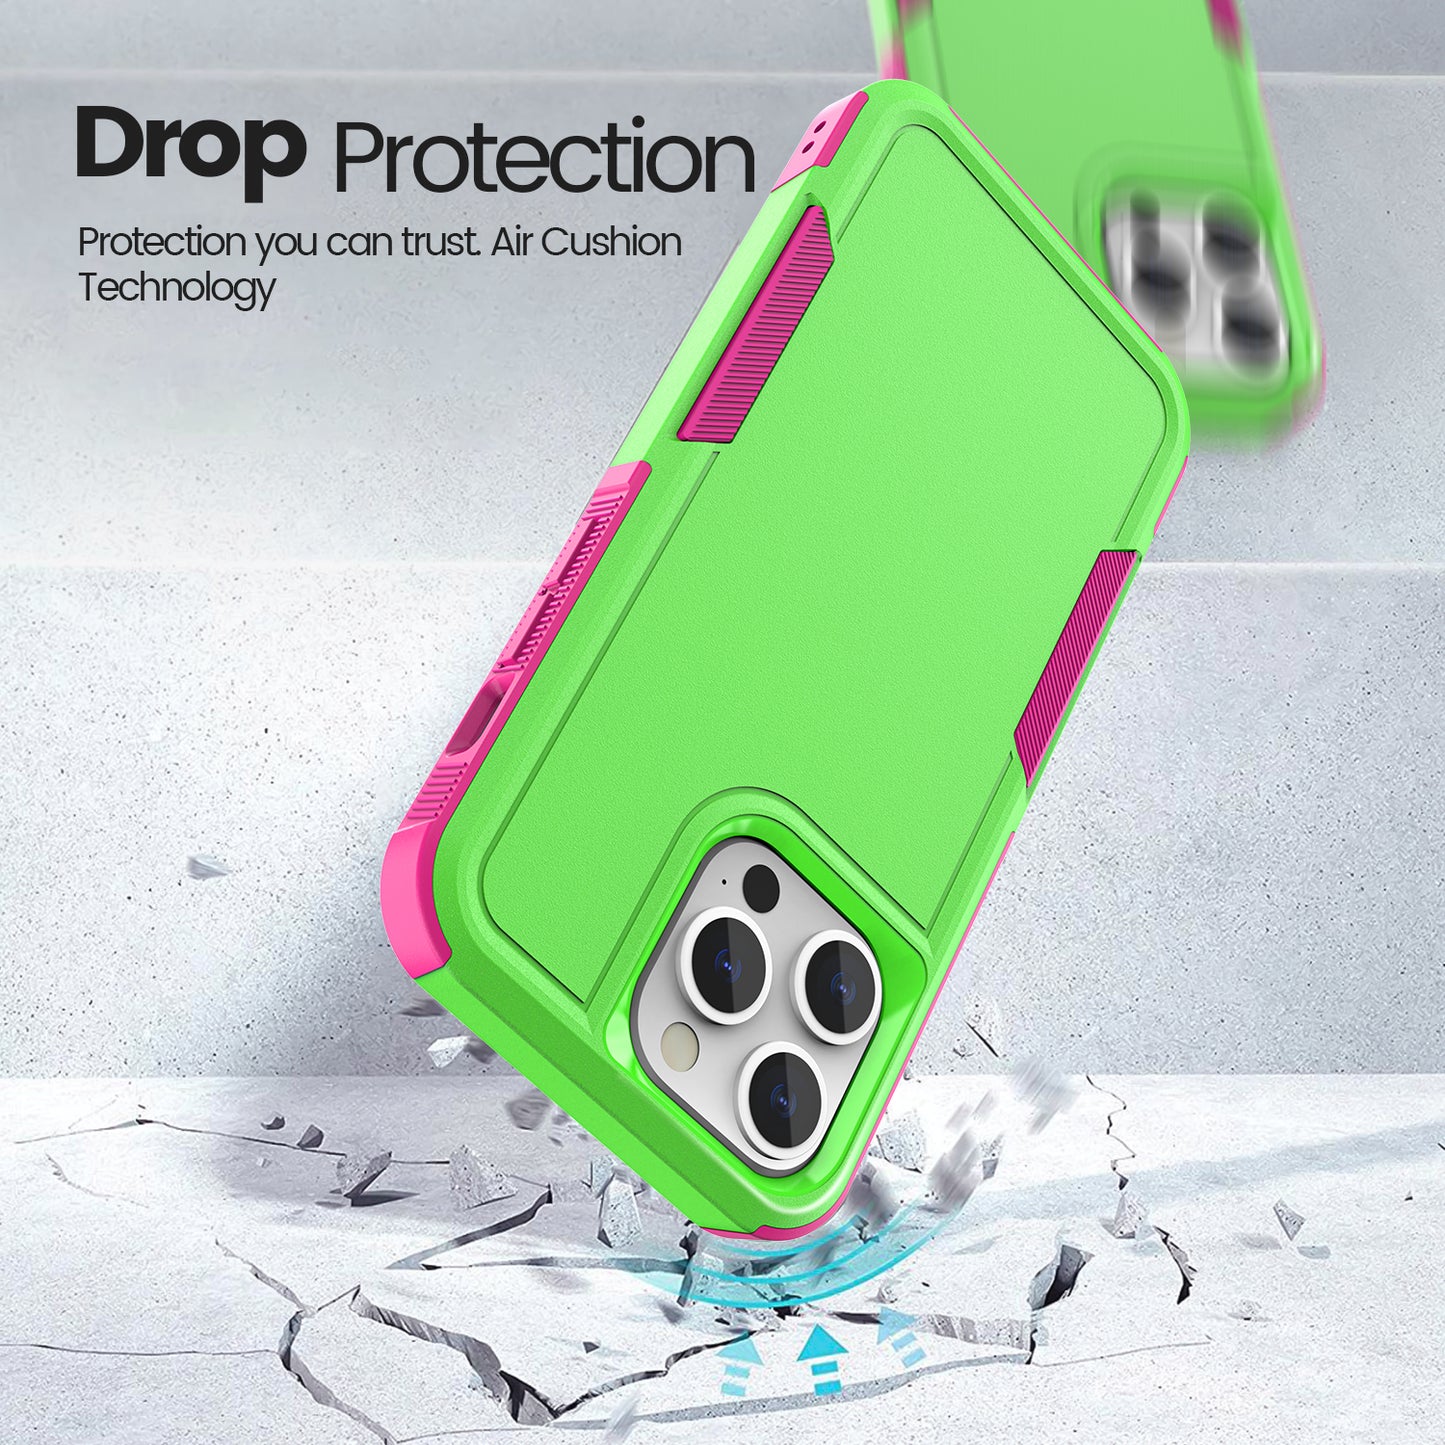 iPhone 15 Pro Max Case Dual Layer Rugged Phone Cover (Lime/Rose)